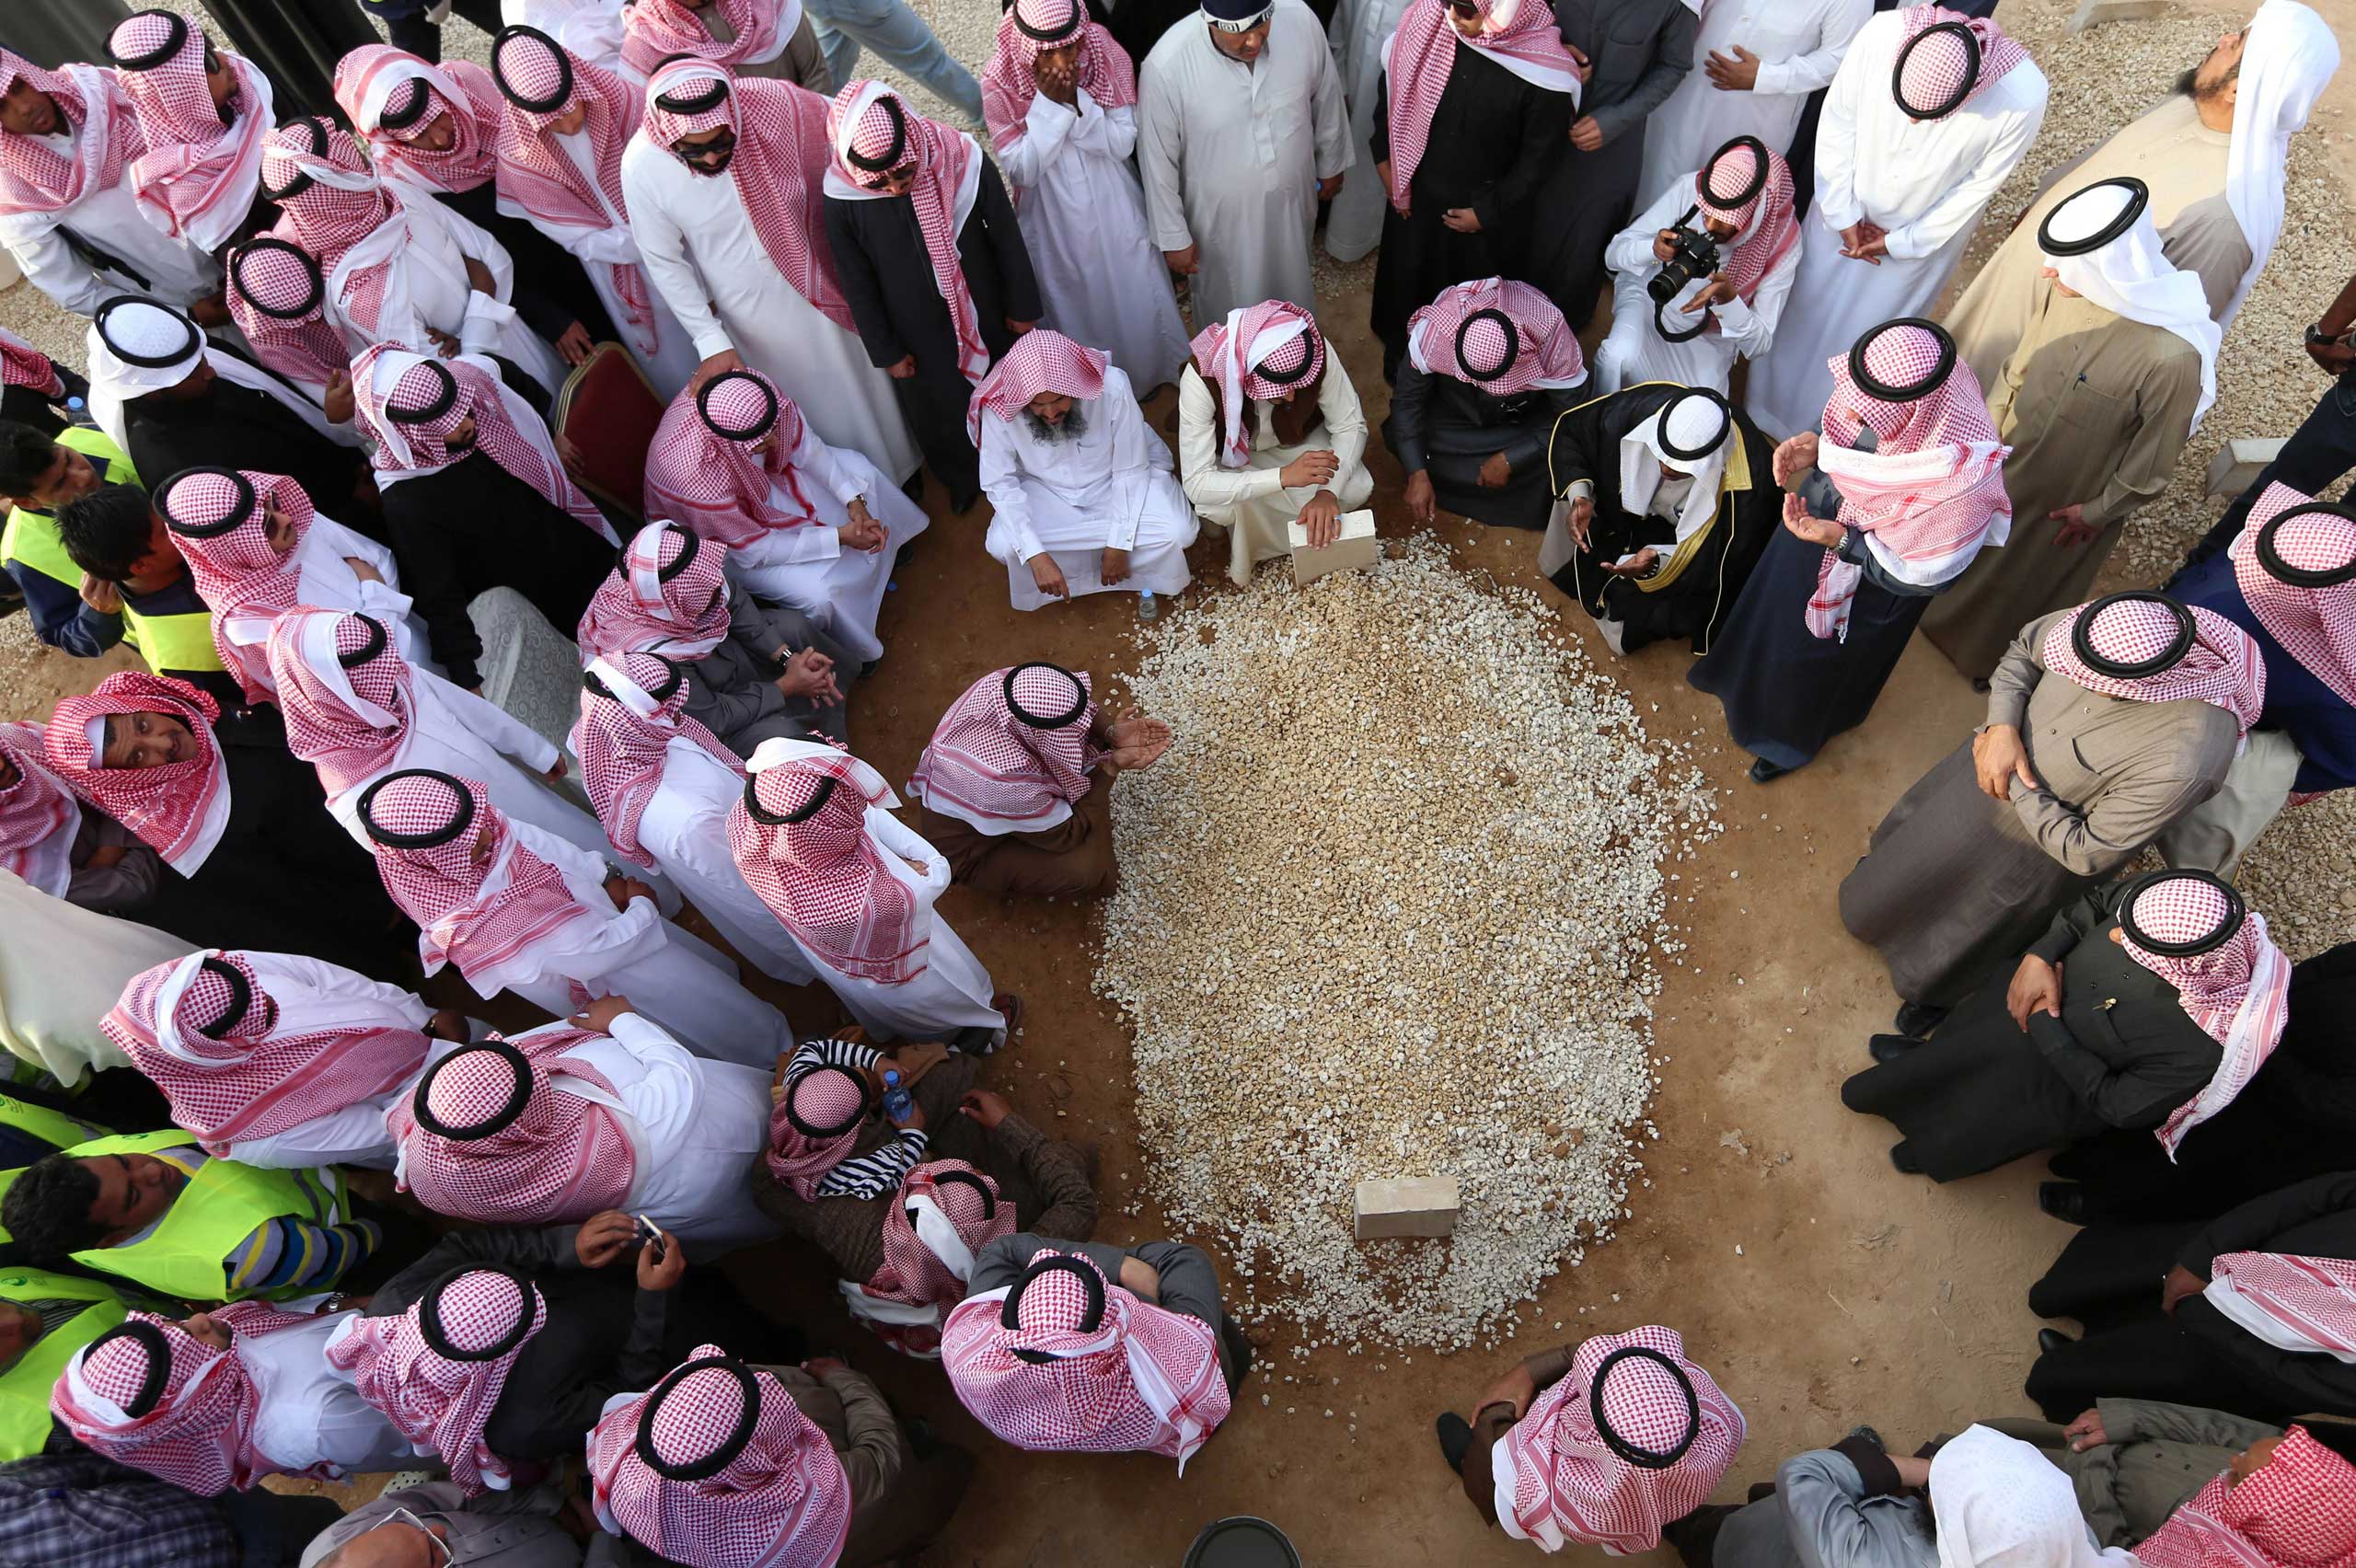 Jan. 23, 2015. Mourners gather around the grave of Saudi Arabia's King Abdullah at the Al-Oud cemetery in Riyadh following his death in the early hours of the morning.